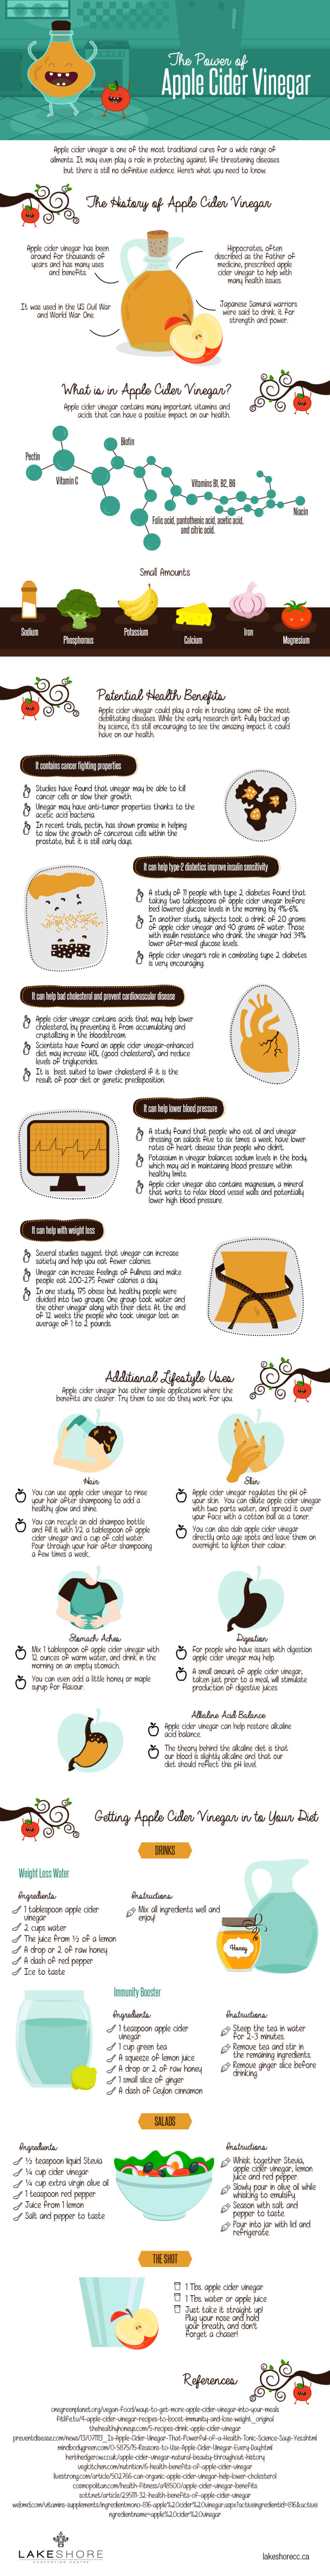 The-power-of-apple-cider-vinegar-An-Infographic